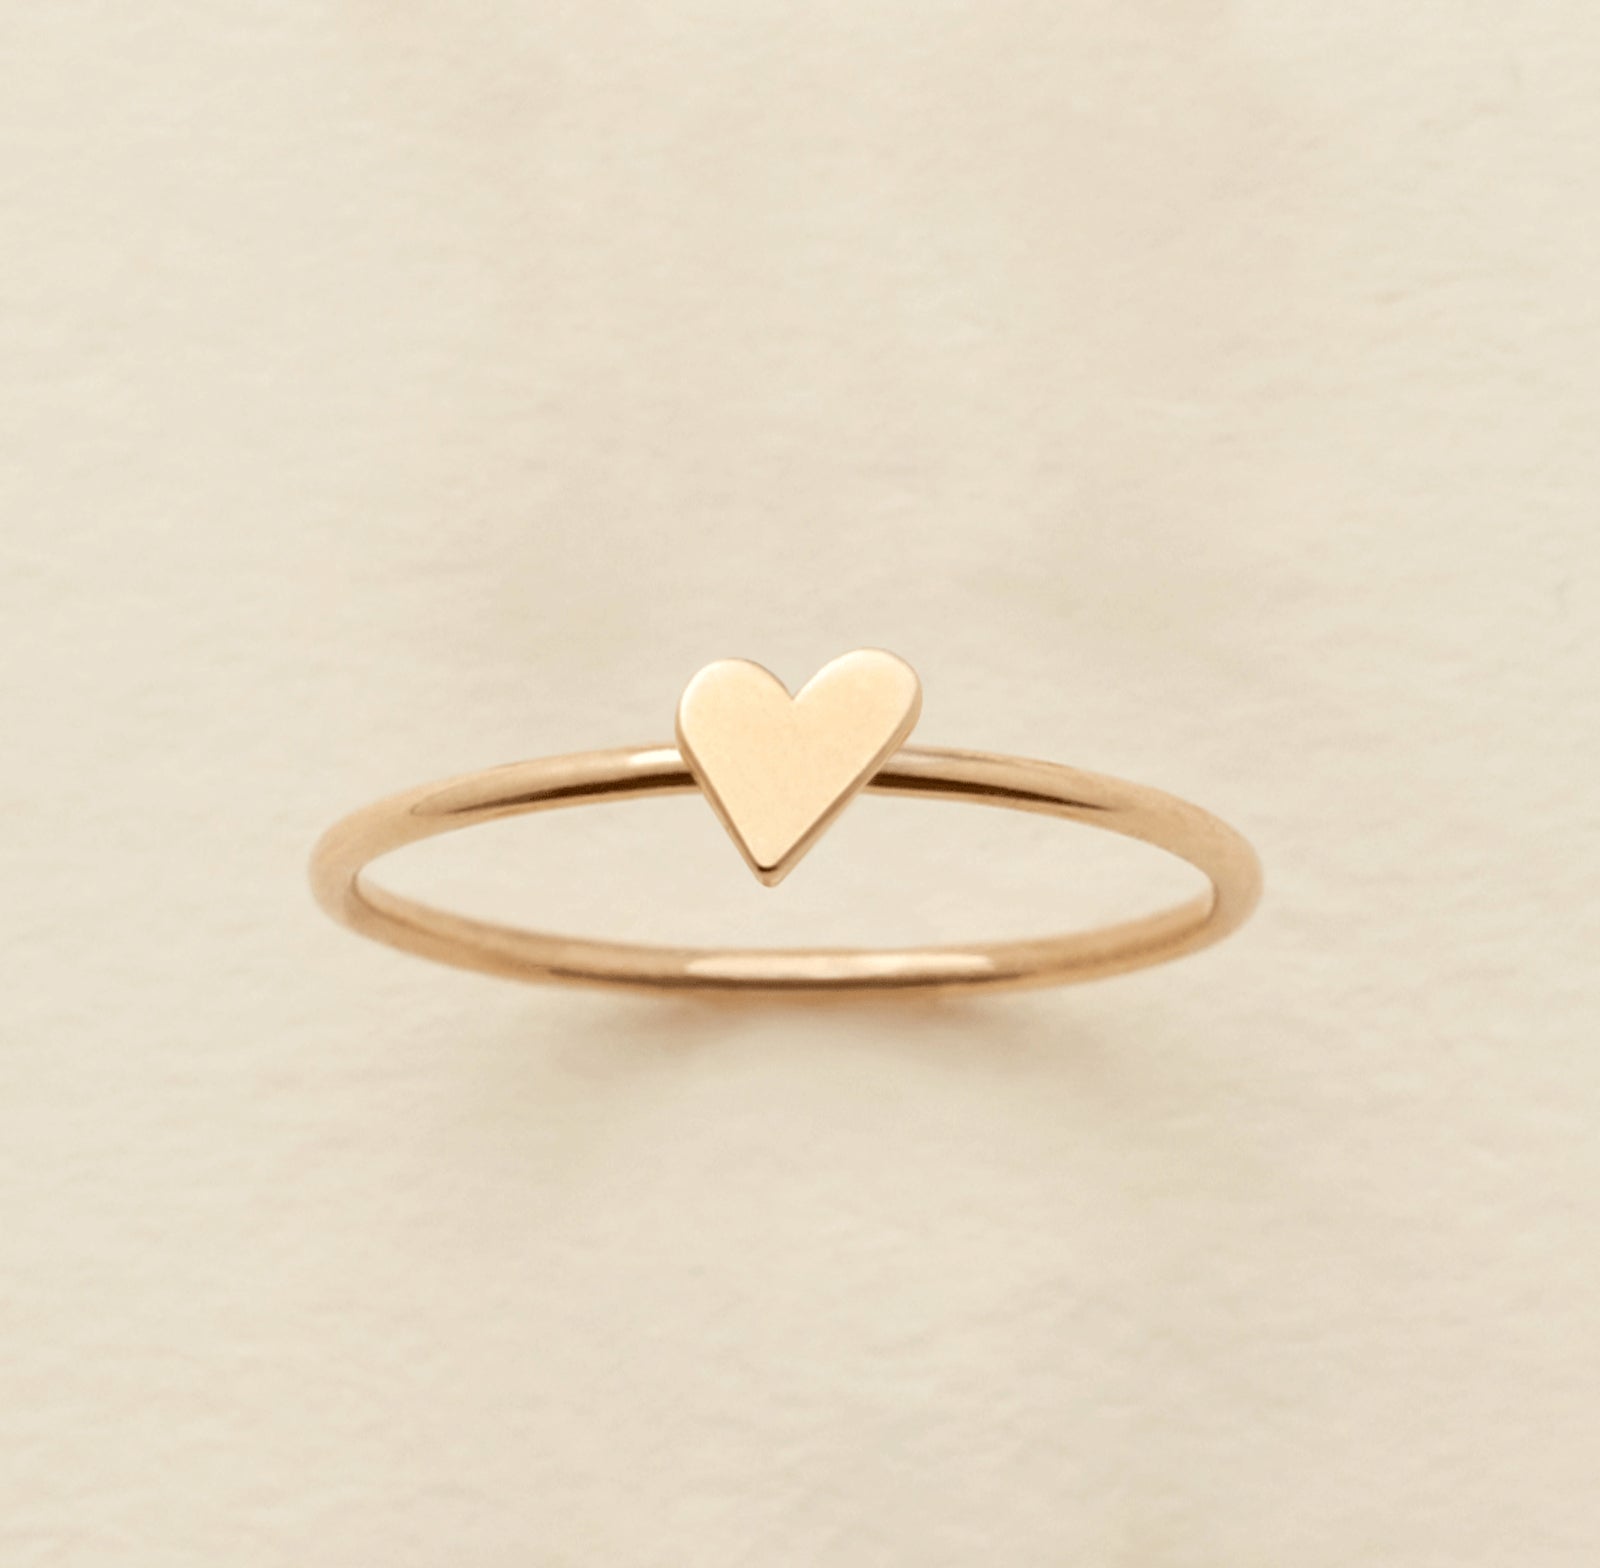 14k Solid Gold Heart Ring 14k Solid Gold / 5 Ring